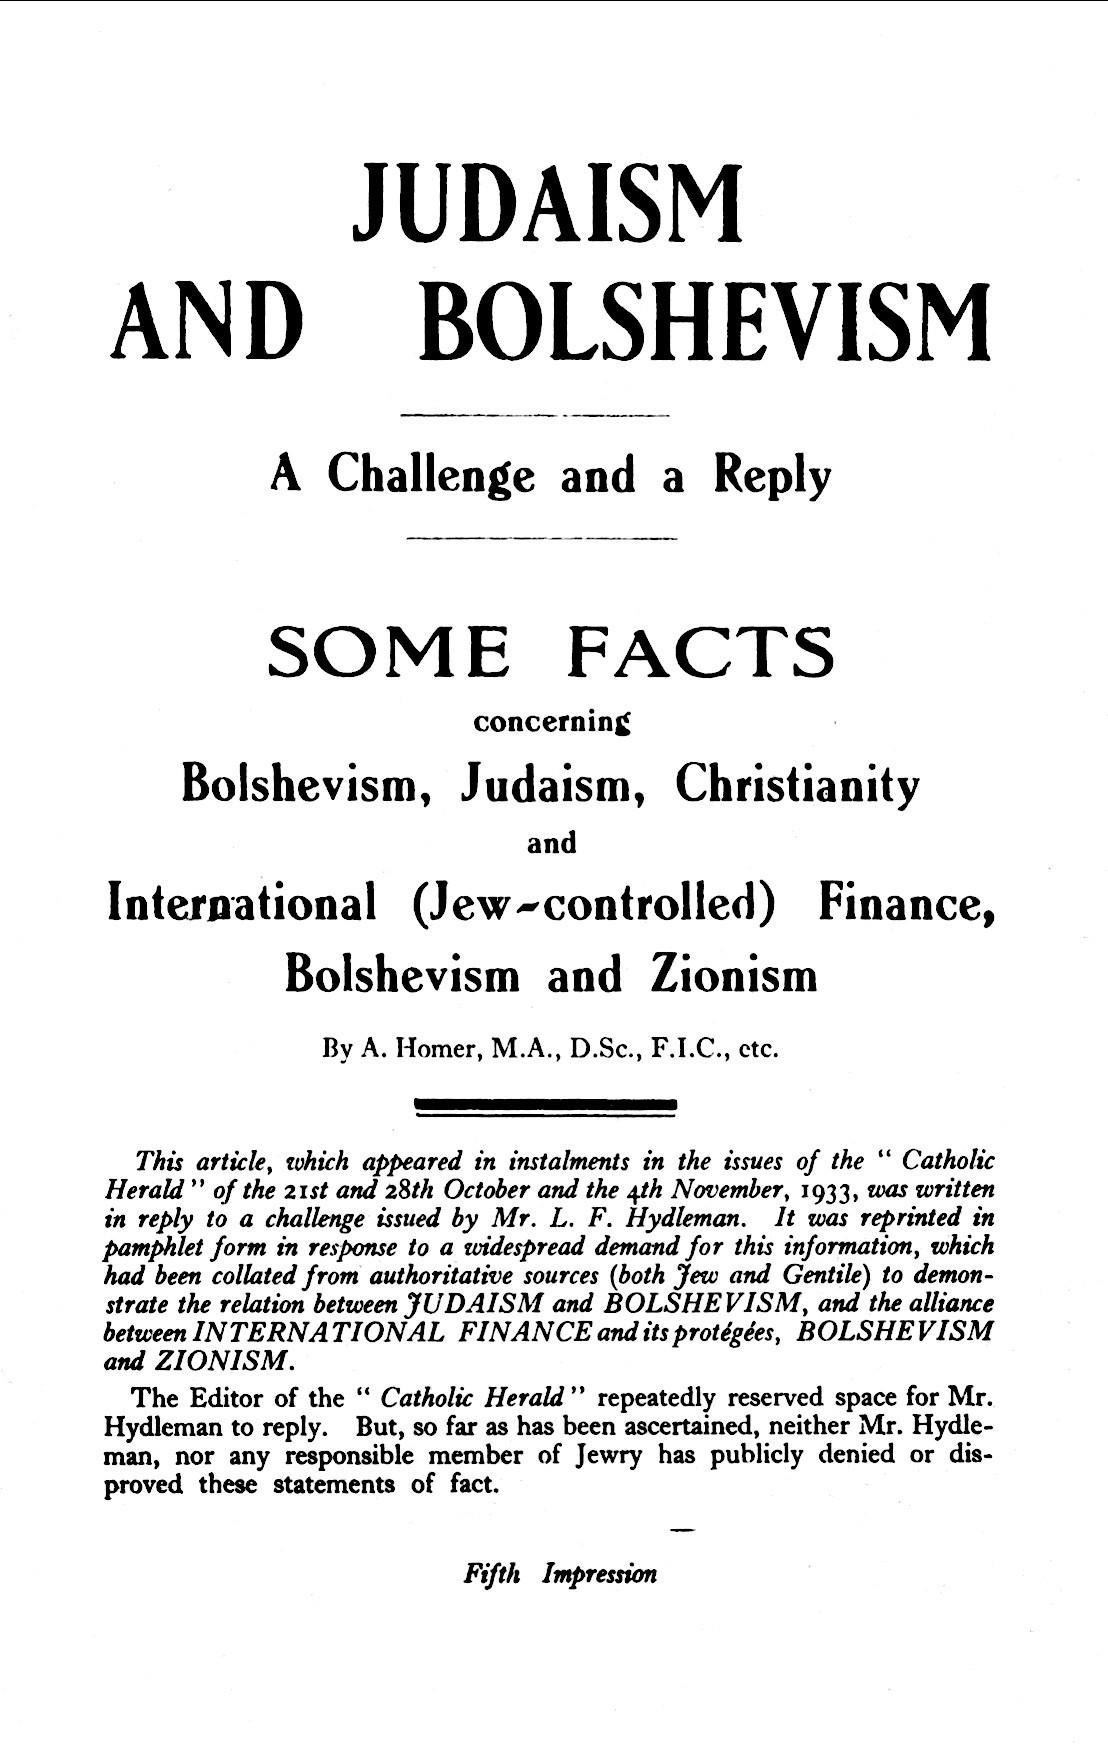 Some Facts Concerning Bolshevism, Judaism, Christianity (1933) by A. Homer